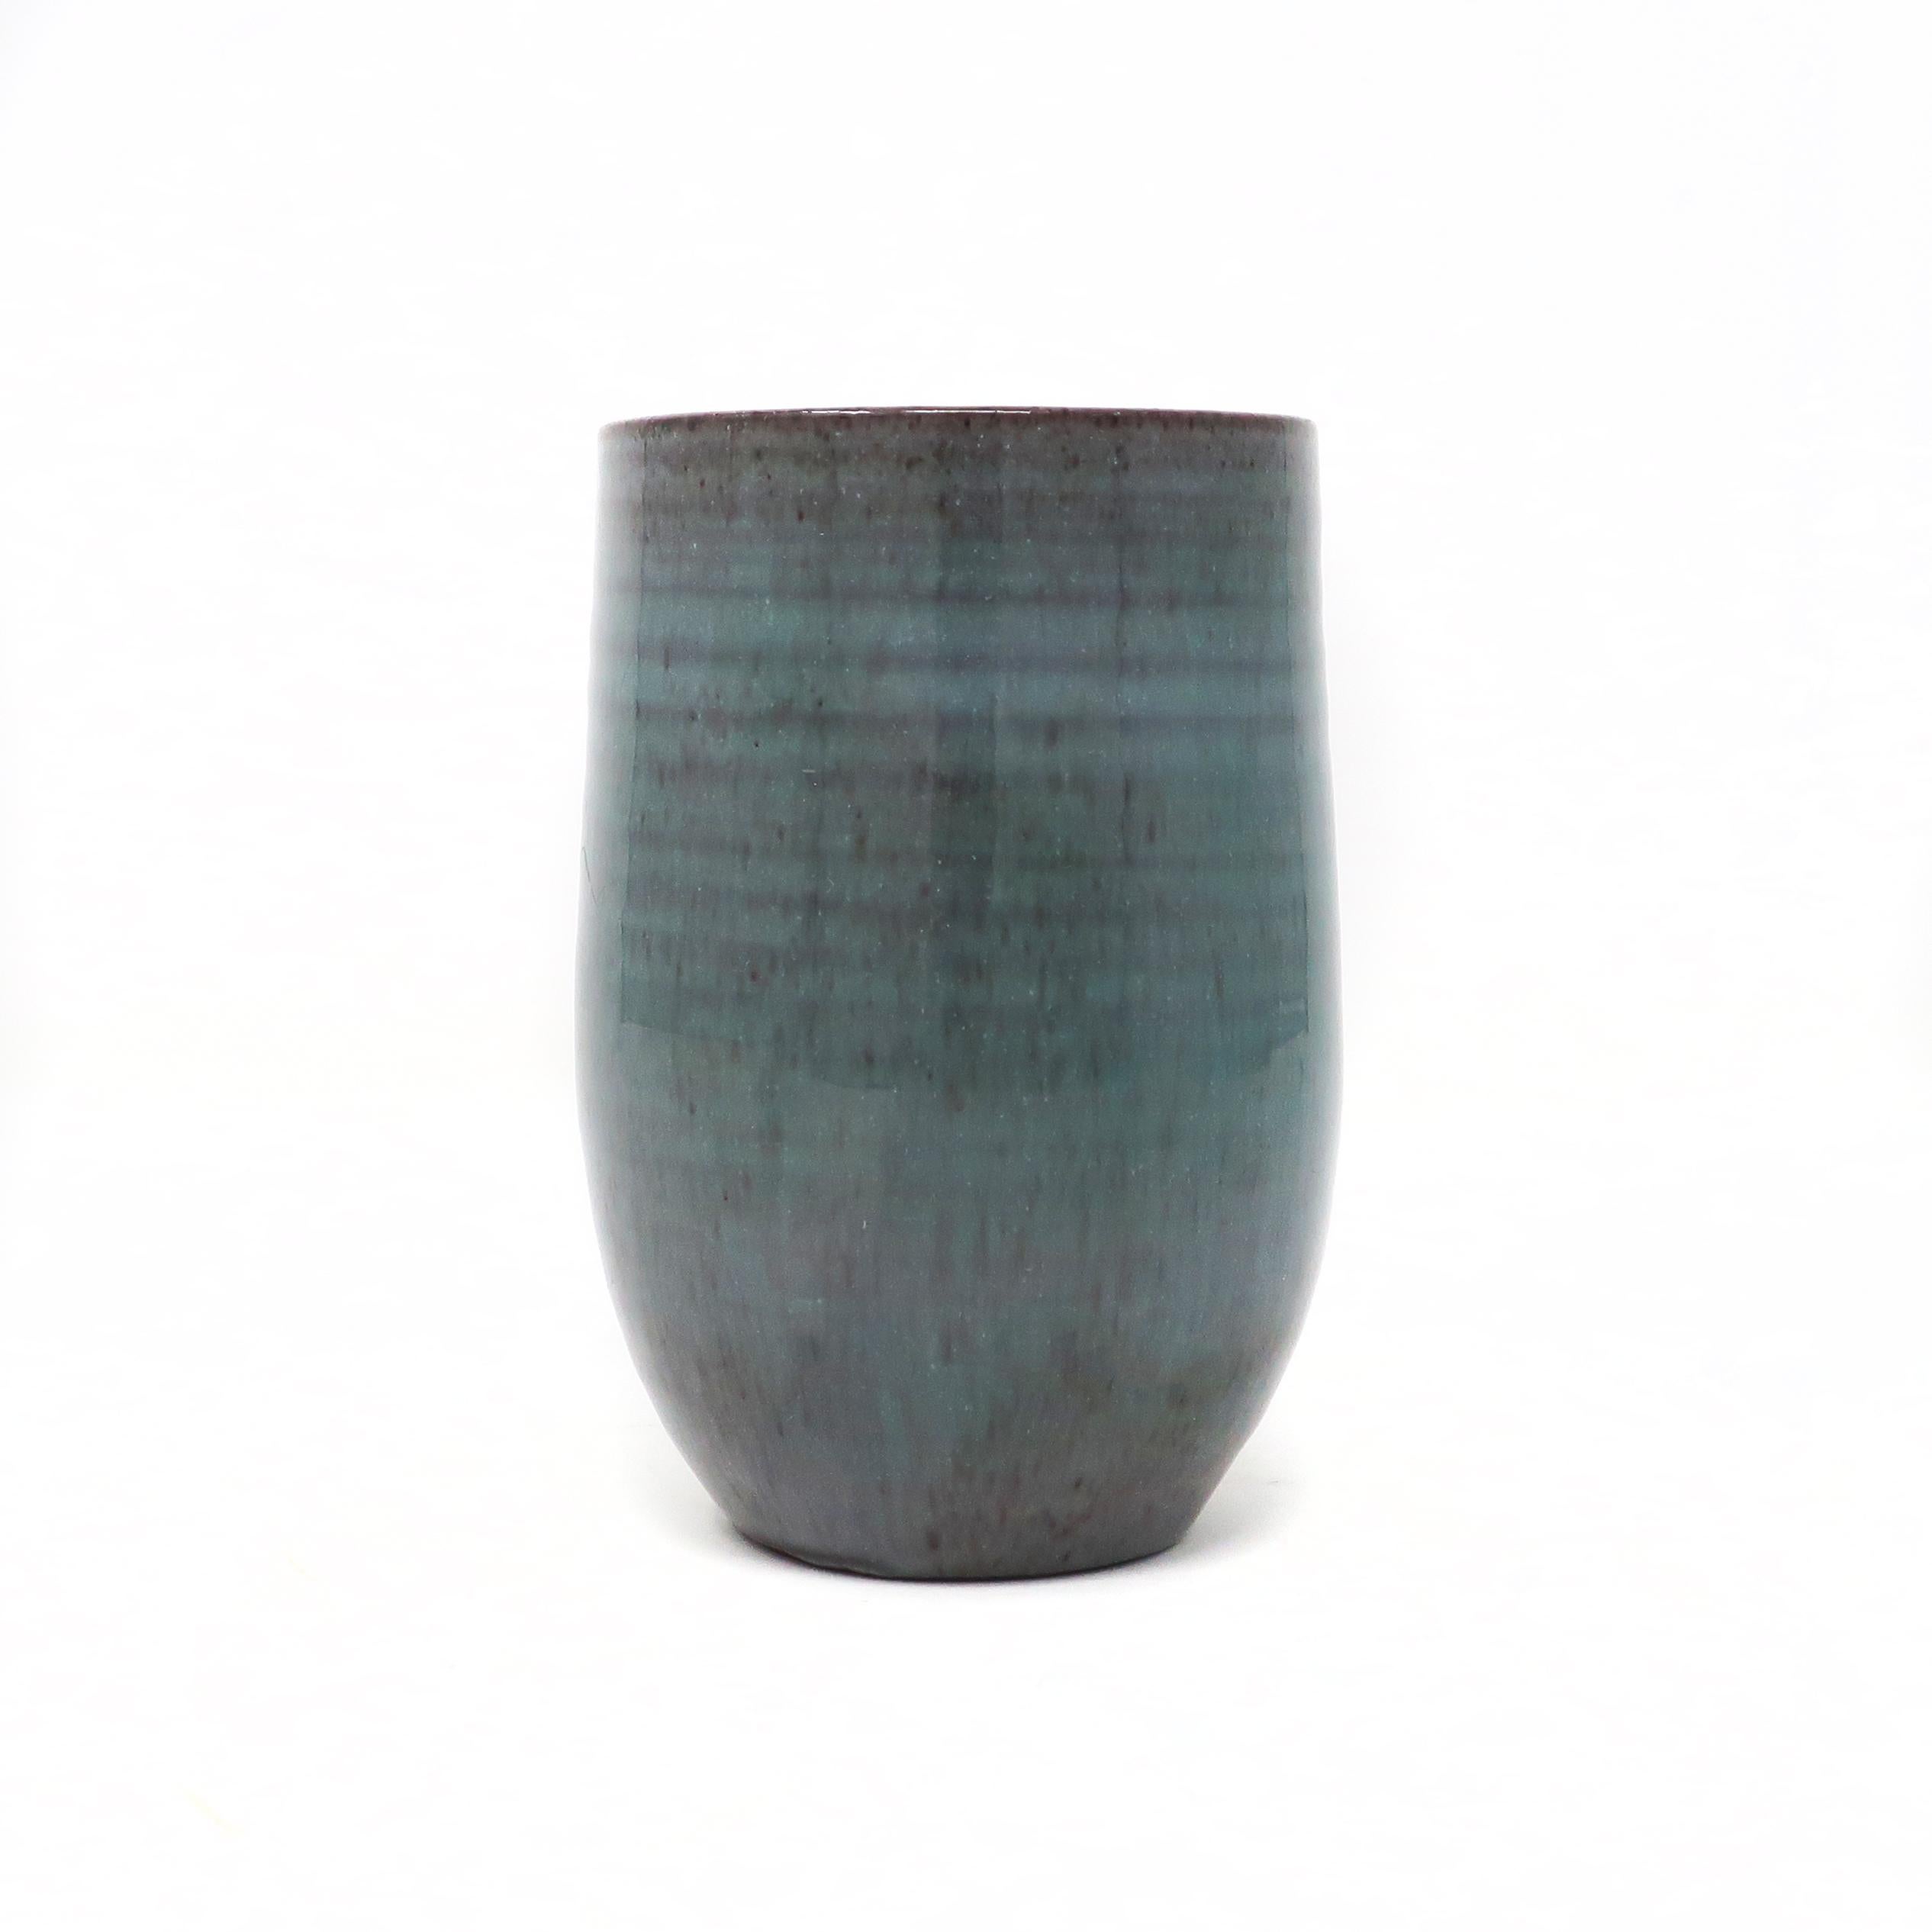 A lovely turquoise ceramic cup by Edwin & Mary Scheier, one of the best known couples to ever work in pottery. Edwin (1910-2008) and Mary (1908-2007)began creating together in the 1930s. This piece has a delicate and sophisticated thin wall, tapered